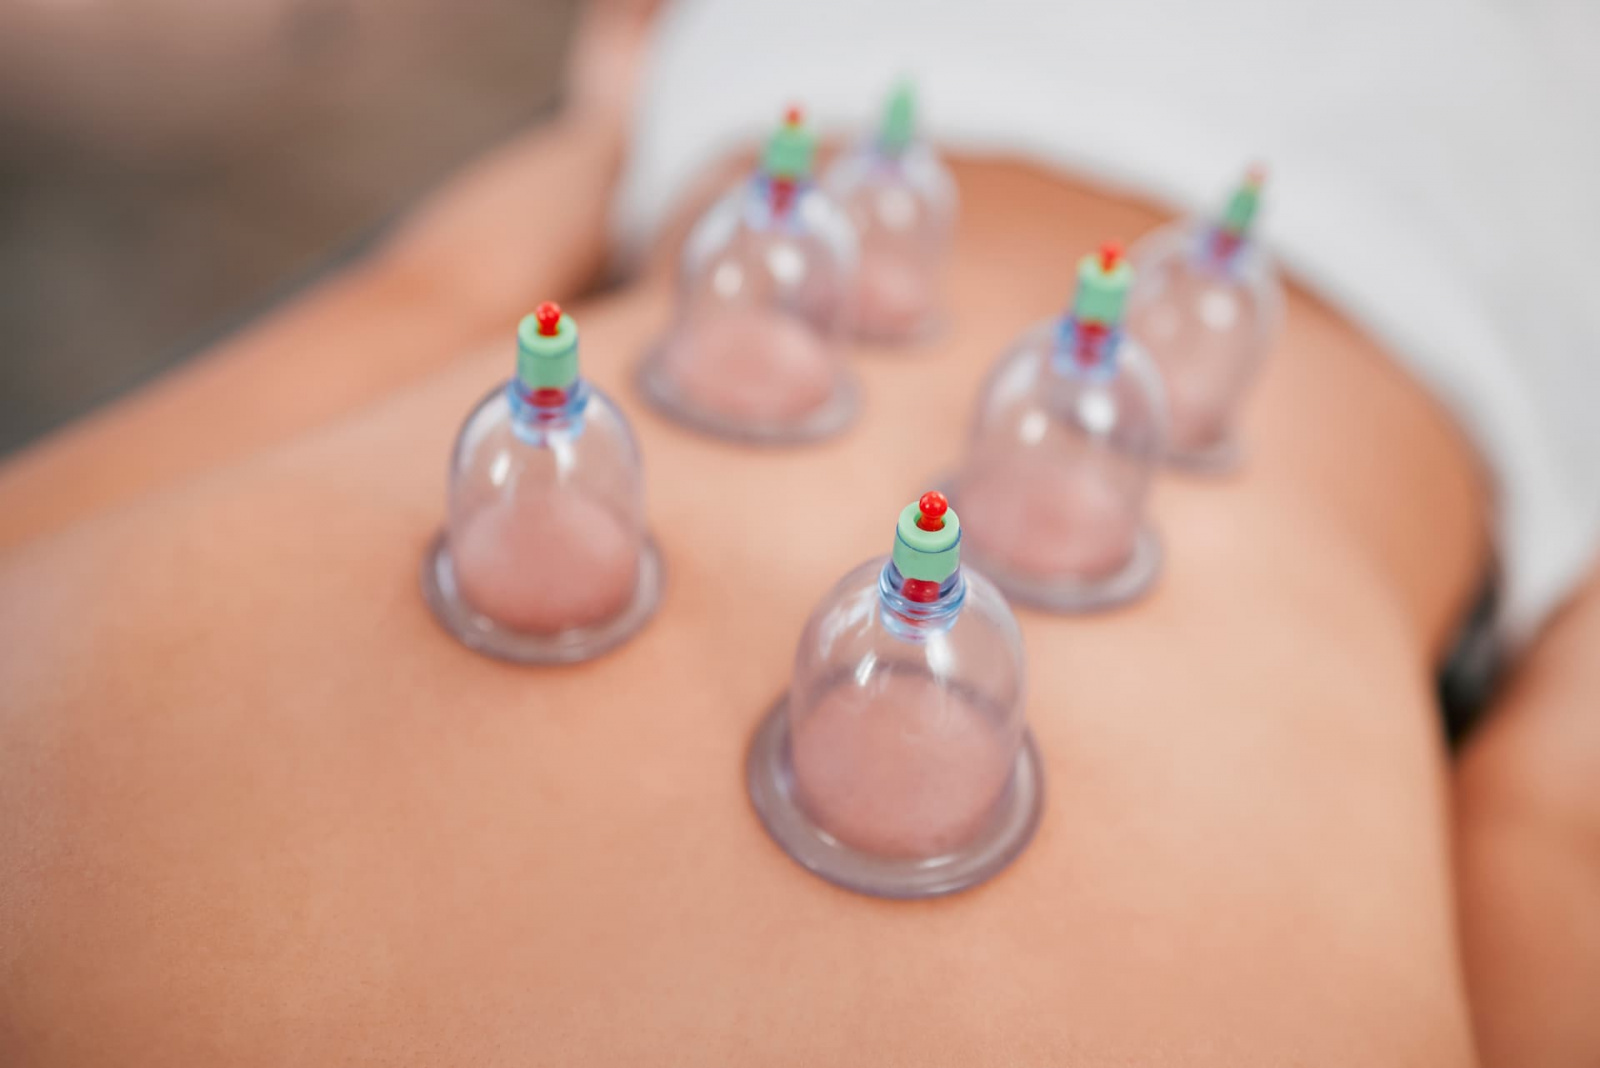 spa-healthy-body-and-cupping-therapy-for-stress-2022-12-22-20-04-18-utc (1).jpg